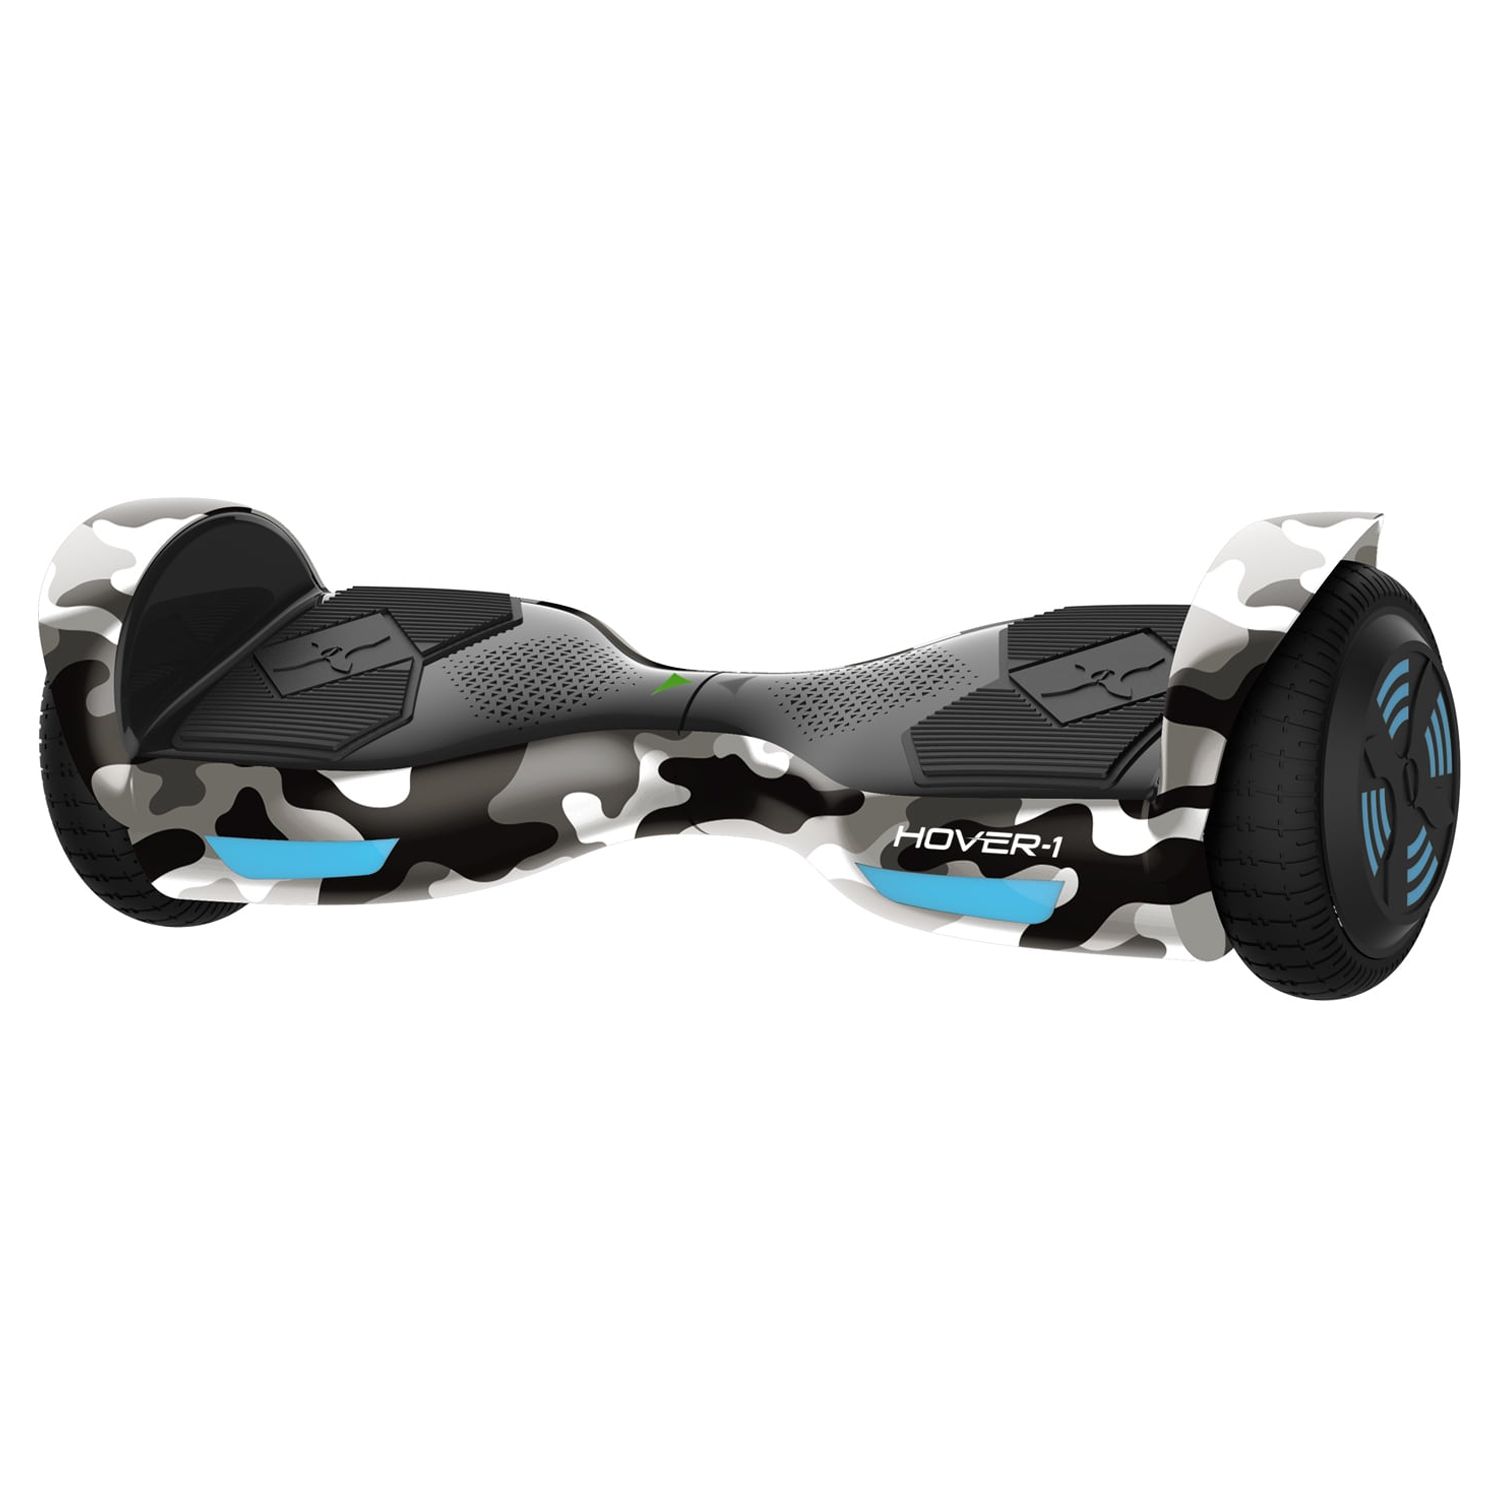 Hover-1 Helix UL Certified Electric Hoverboard with 6.5 In. LED Wheels, LED Sensor Lights, Bluetooth Speaker, Lithium-ion 10 Cell battery, Ages 8+, 160 Lbs Max Weight, Camouflage - image 5 of 10